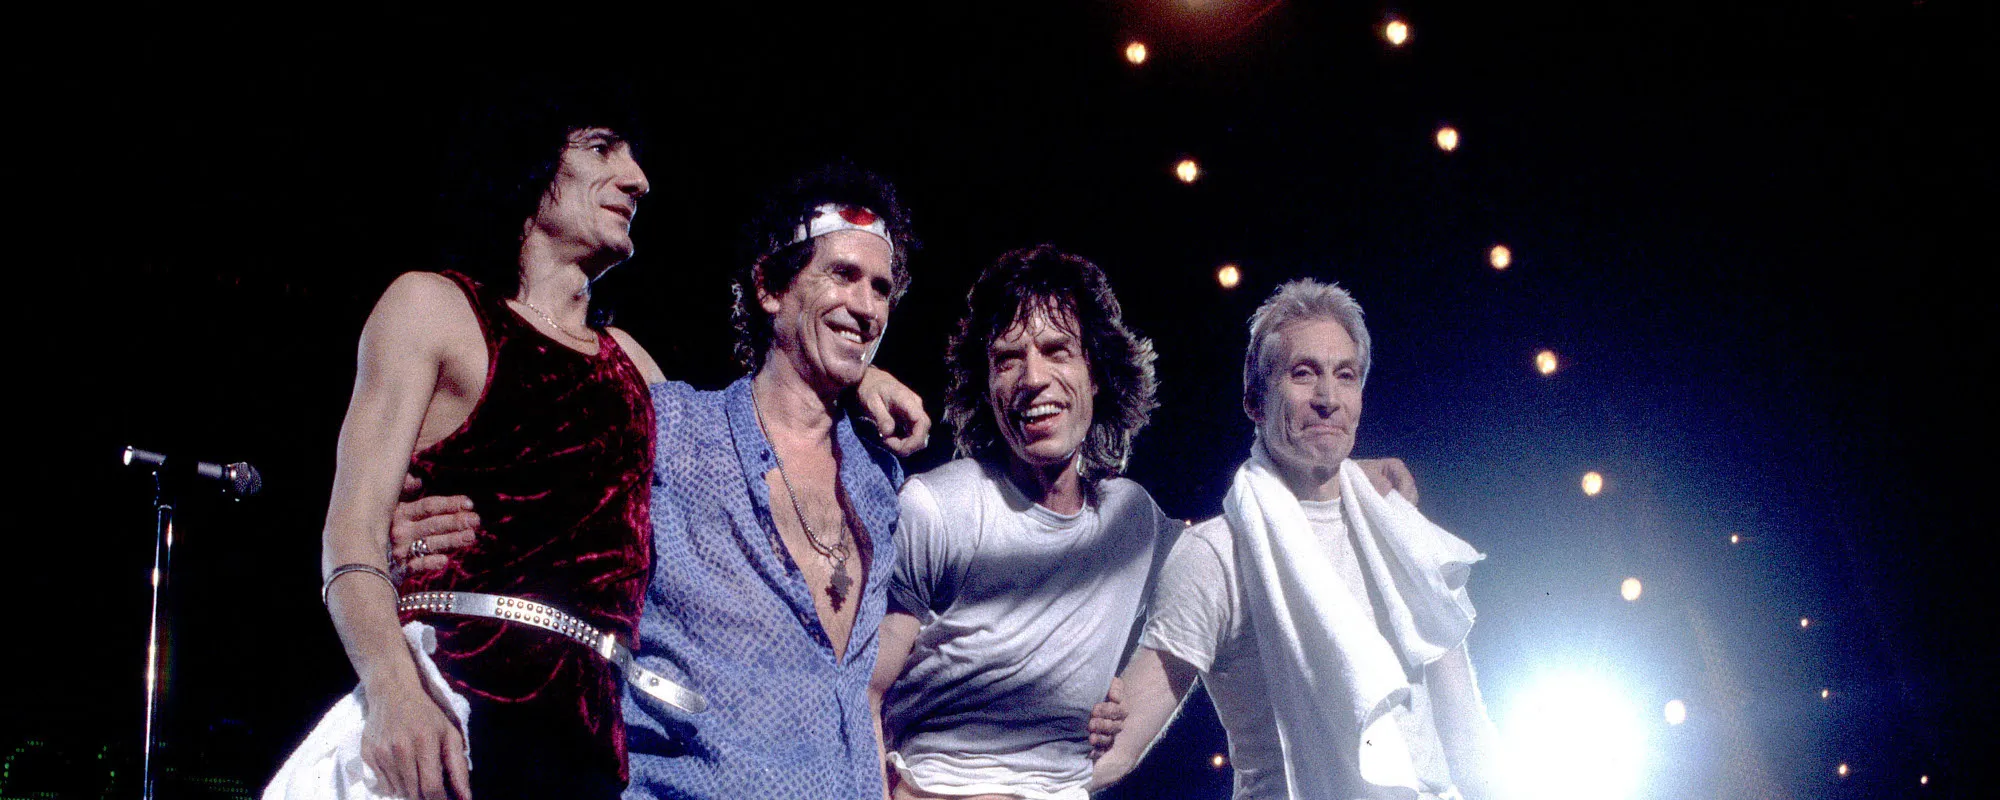 4 Songs You Didn’t Know Mick Jagger and Keith Richards Wrote for Other Artists